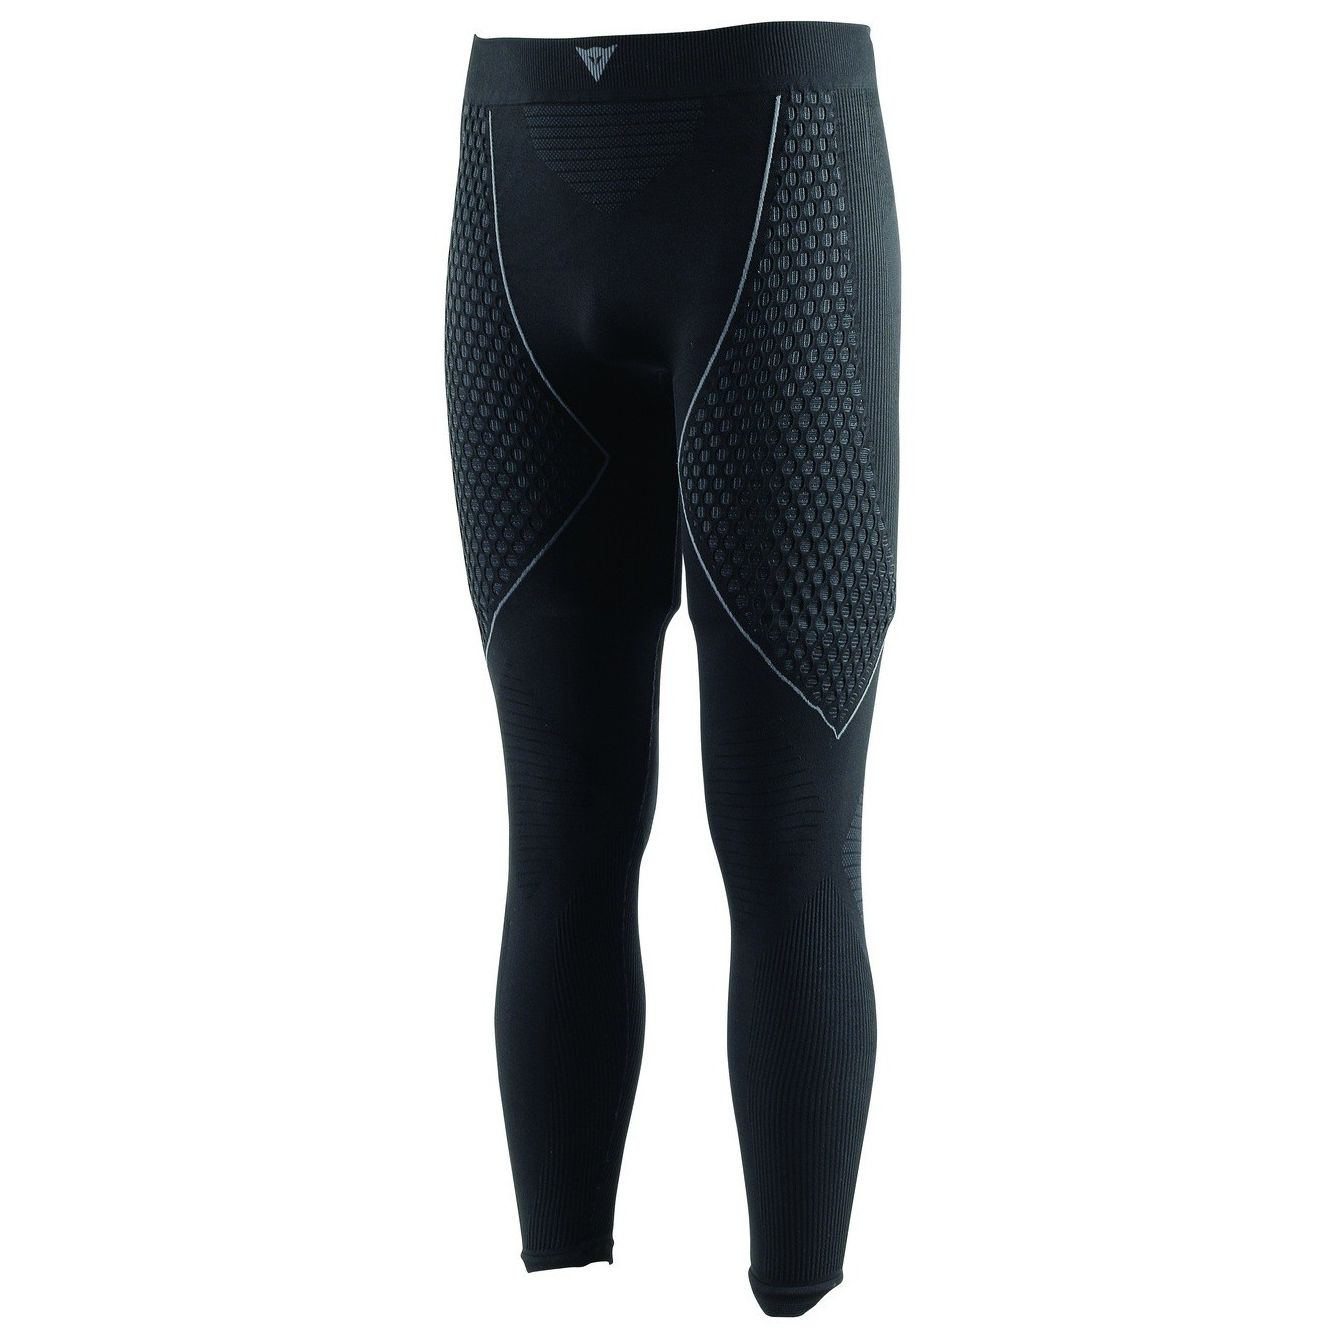 Caleçon Dainese D-core Thermo Pant Ll